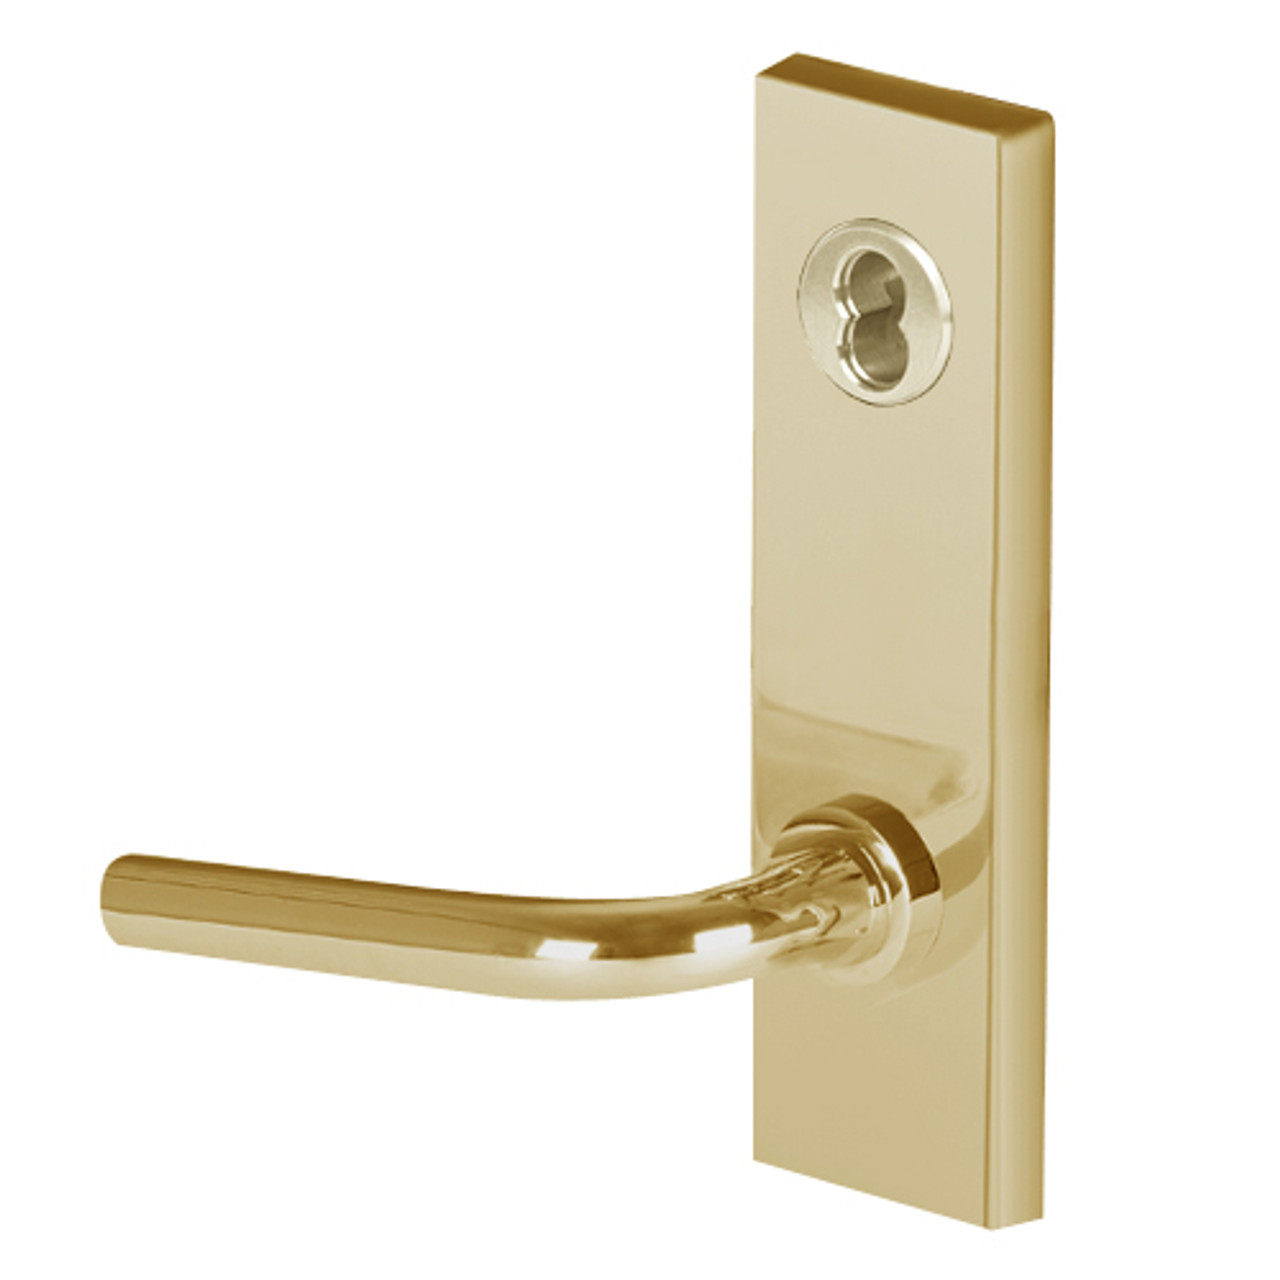 45HW7TWEL12M606 Best 40HW series Double Key Deadbolt Fail Safe Electromechanical Mortise Lever Lock with Solid Tube w/ No Return Style in Satin Brass